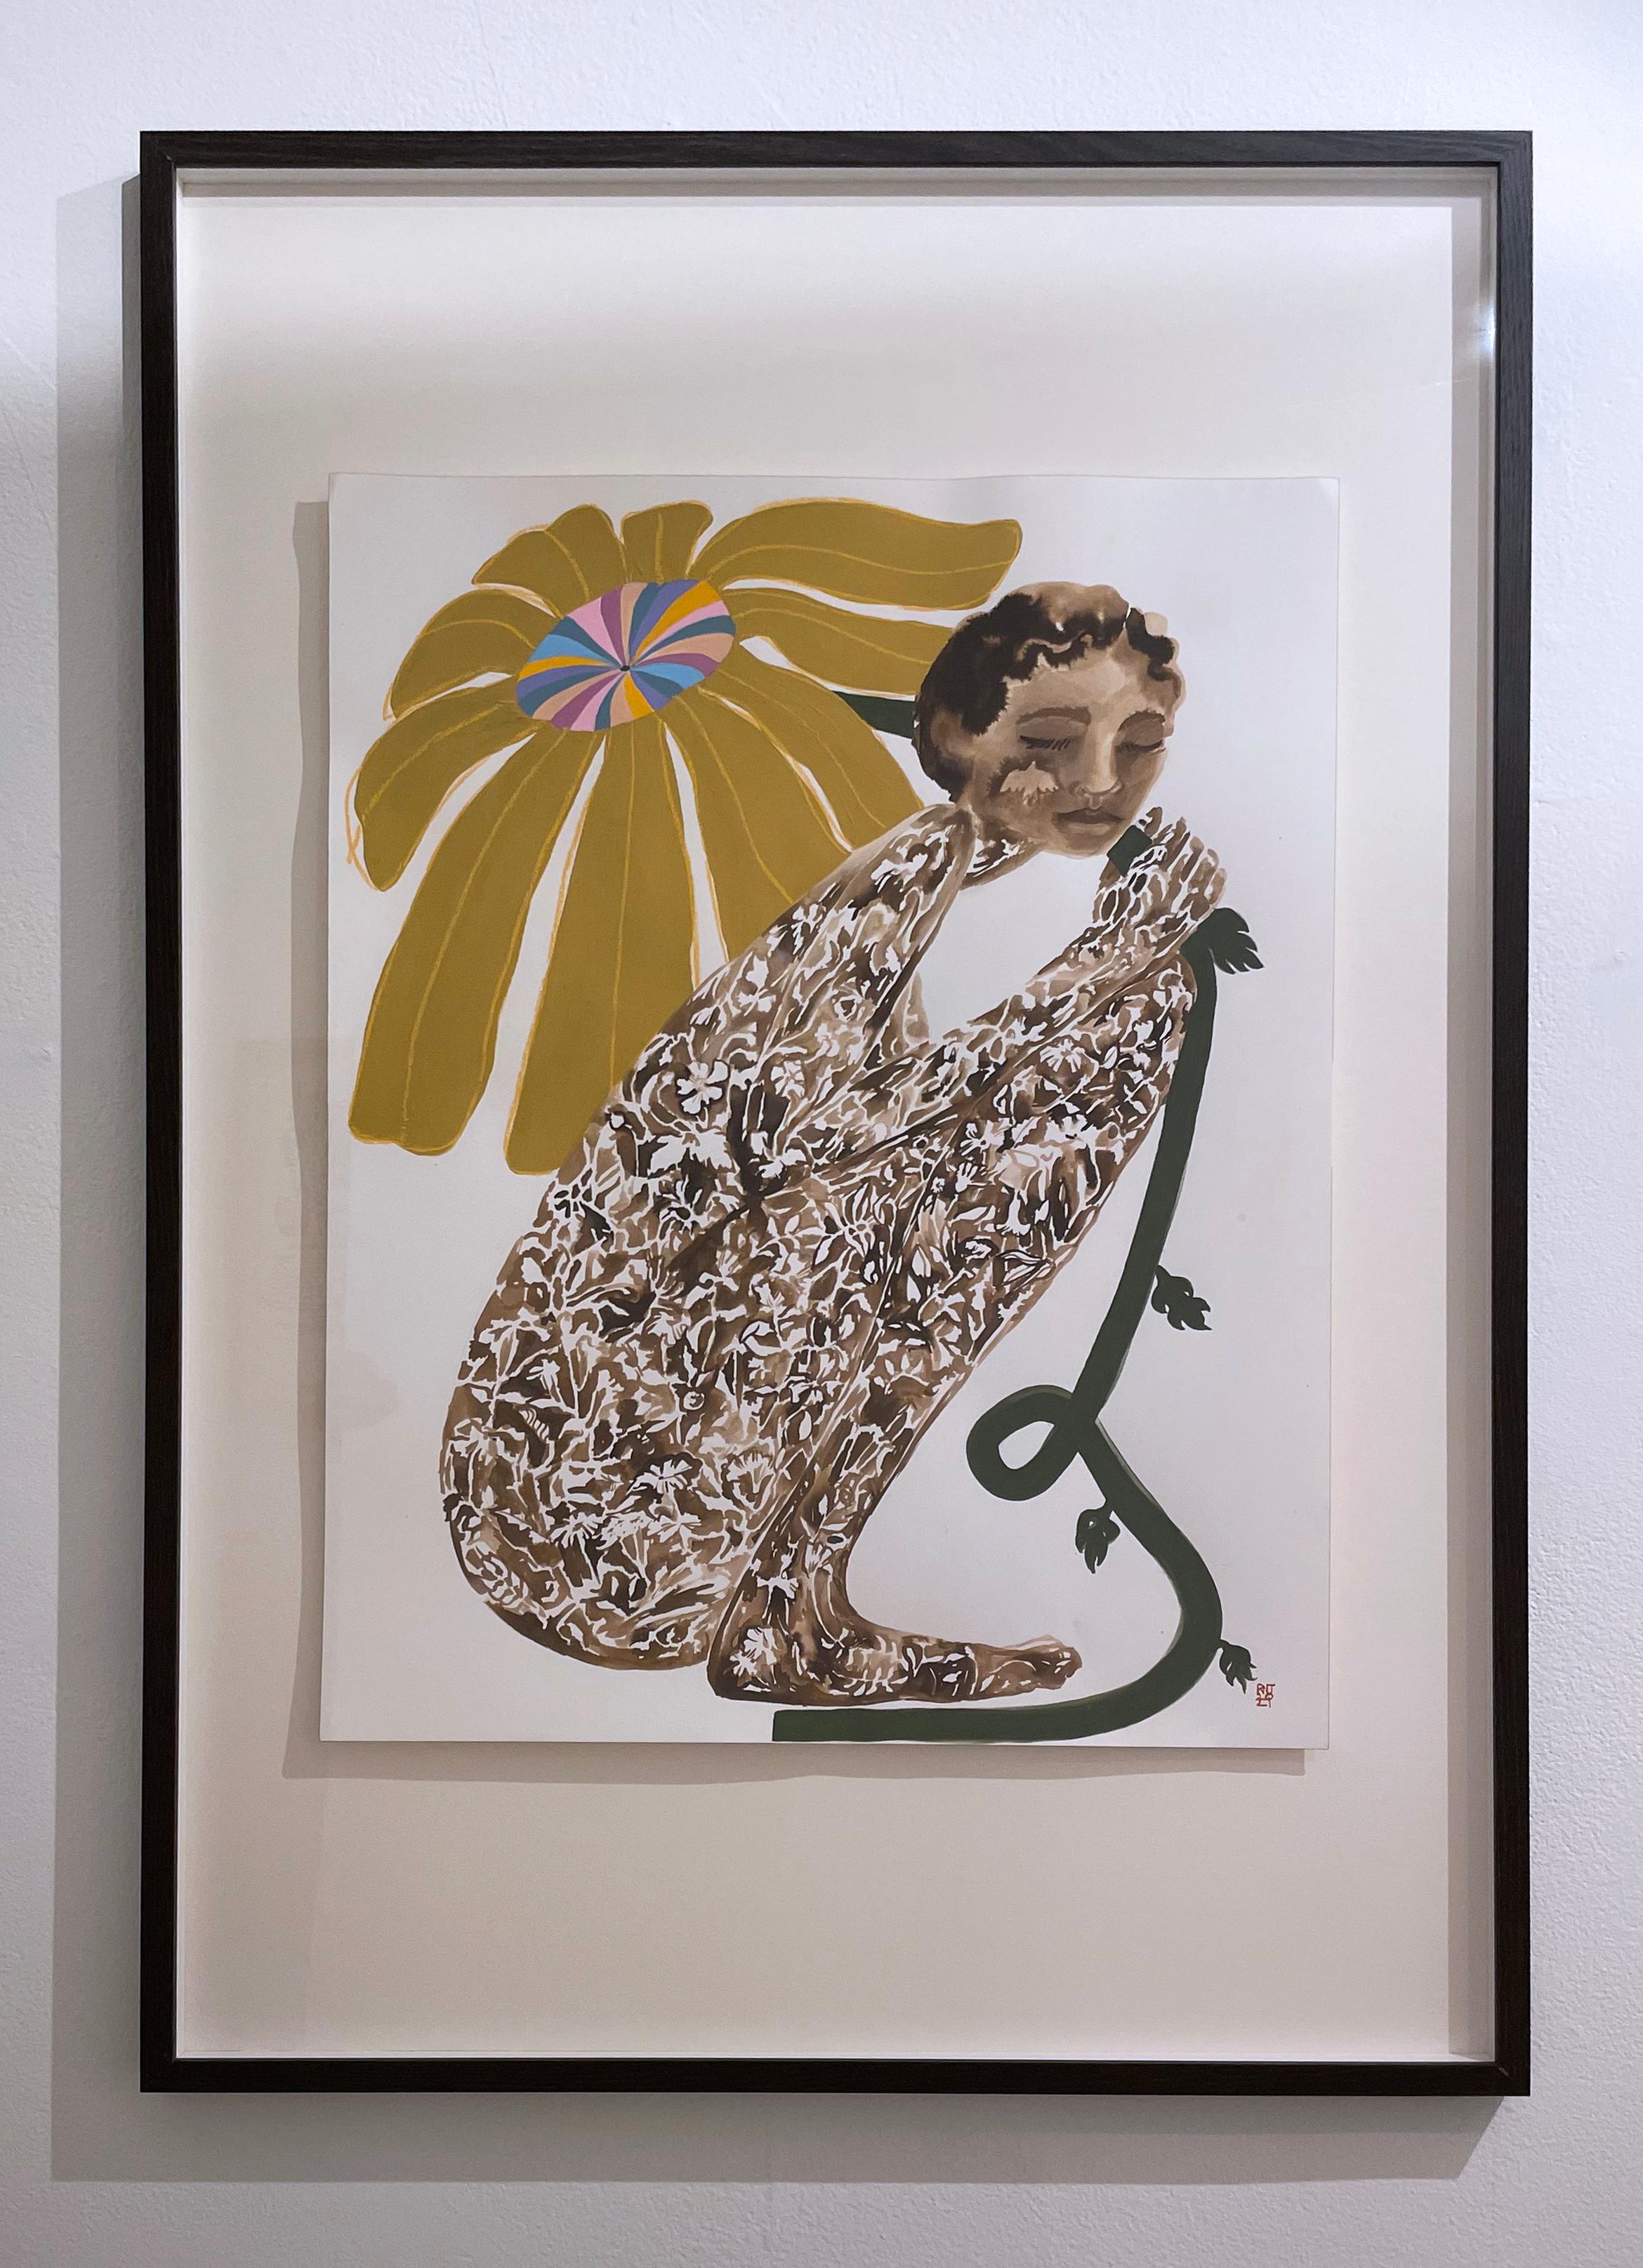 Daisy Daydream, 2021, female figure, flower, plant, earth tones, brown, pastels - Painting by Rebecca Johnson